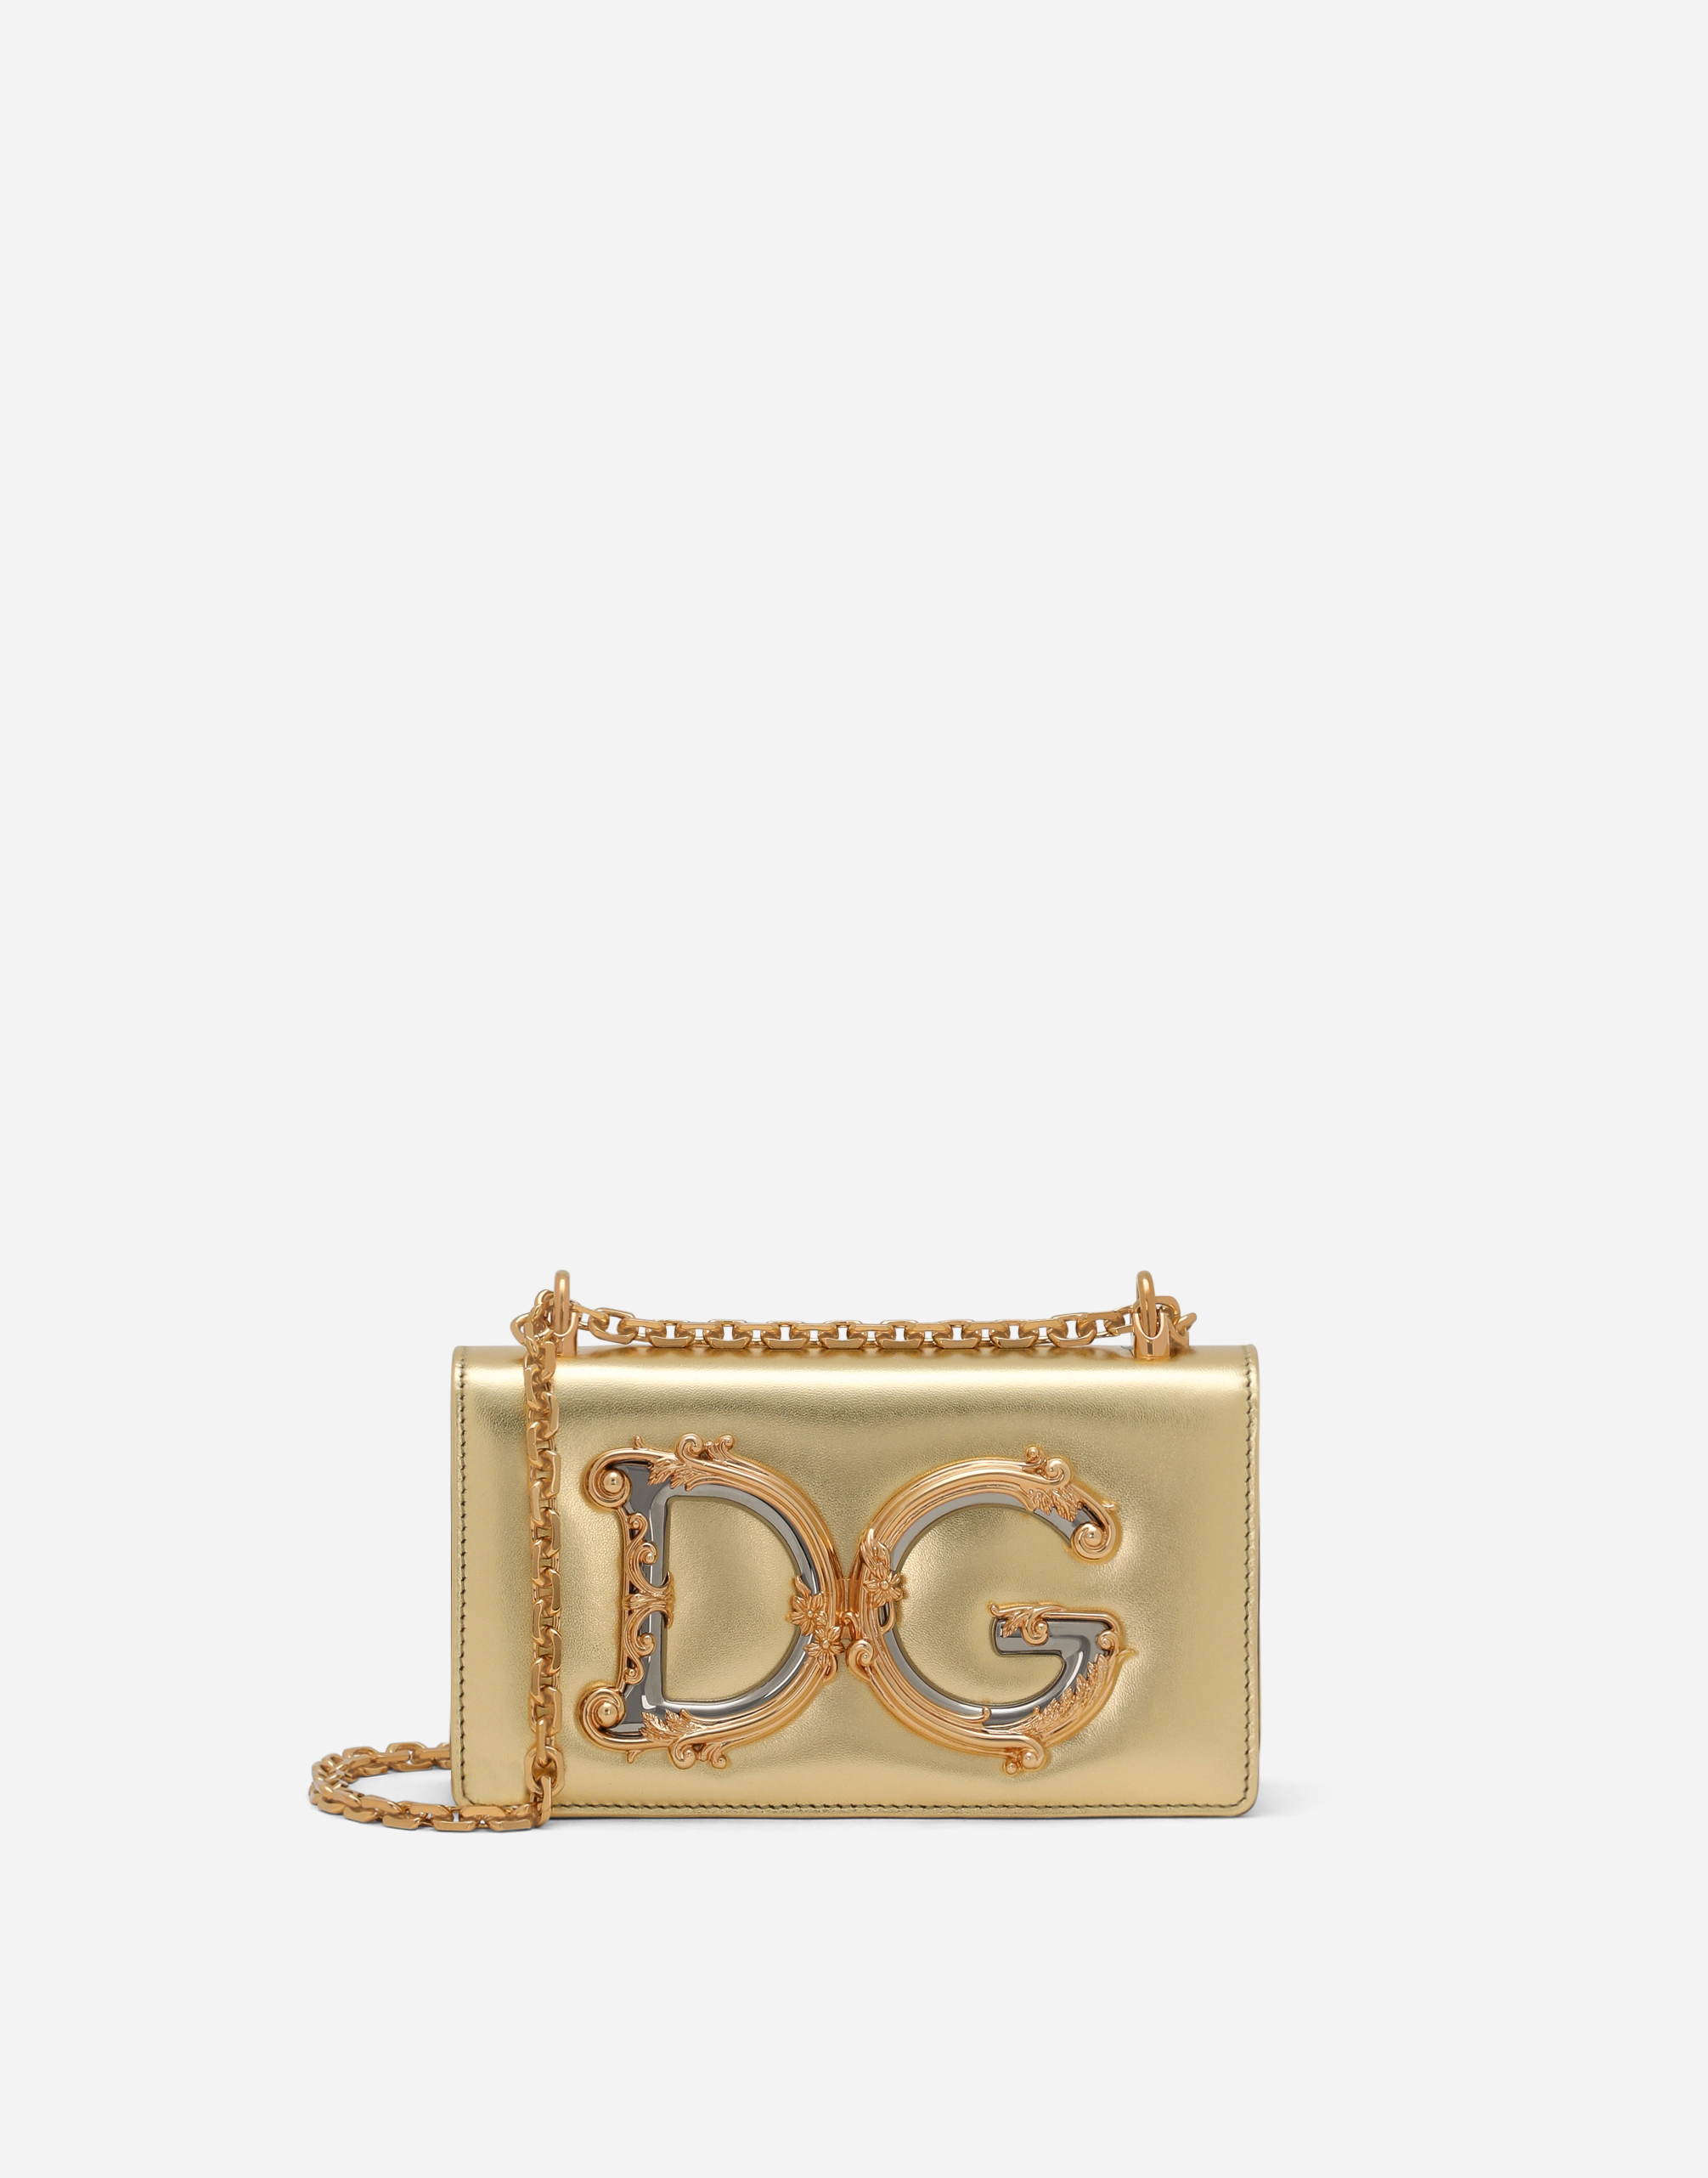 DG Girls phone bag in nappa mordore leather in Gold